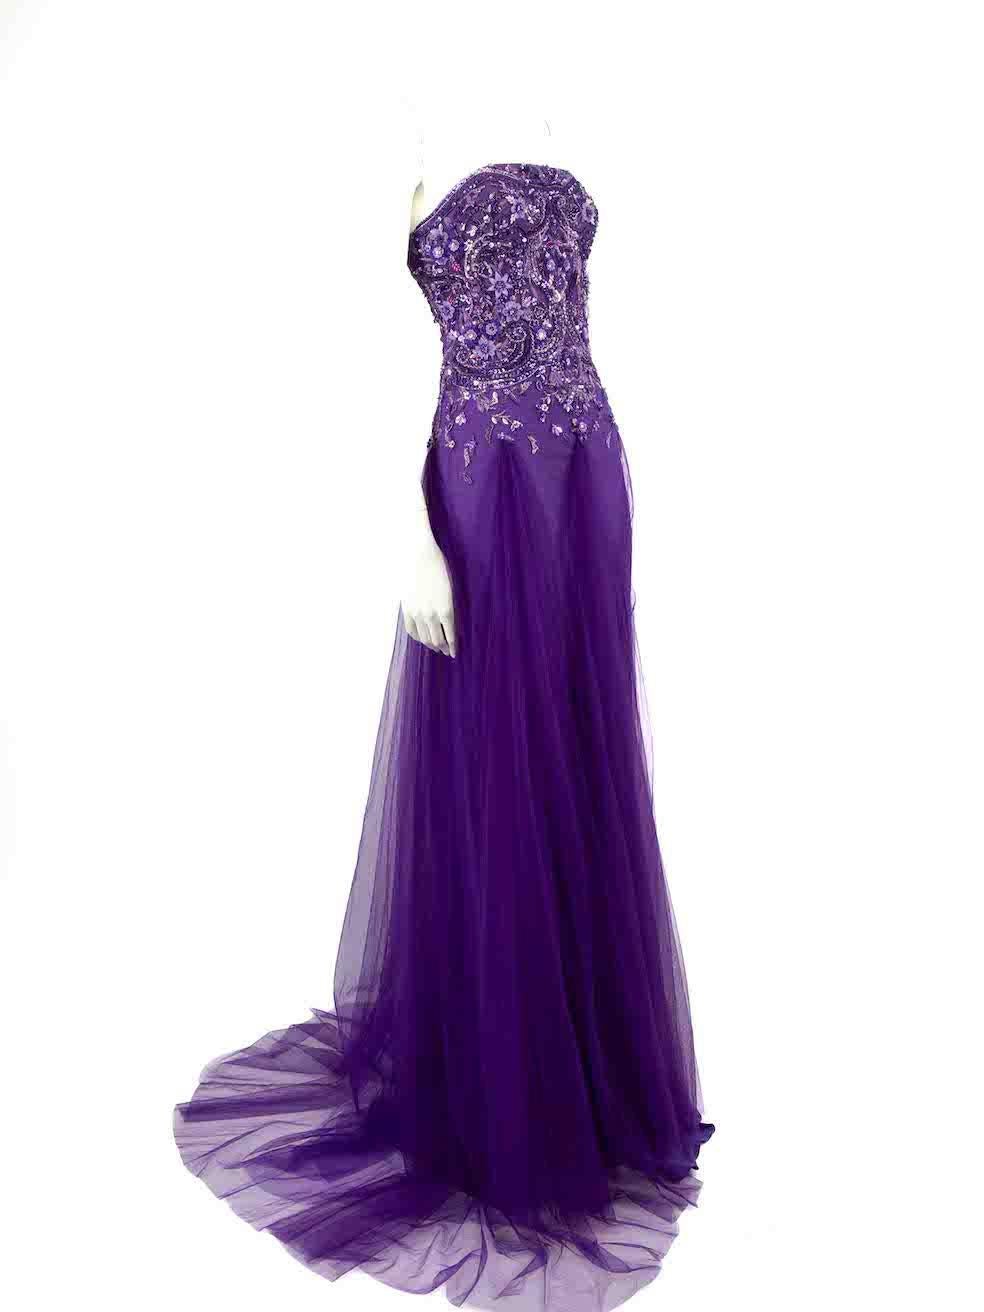 Honayda SS23 Purple Embellished Strapless Gown Size S In New Condition For Sale In London, GB